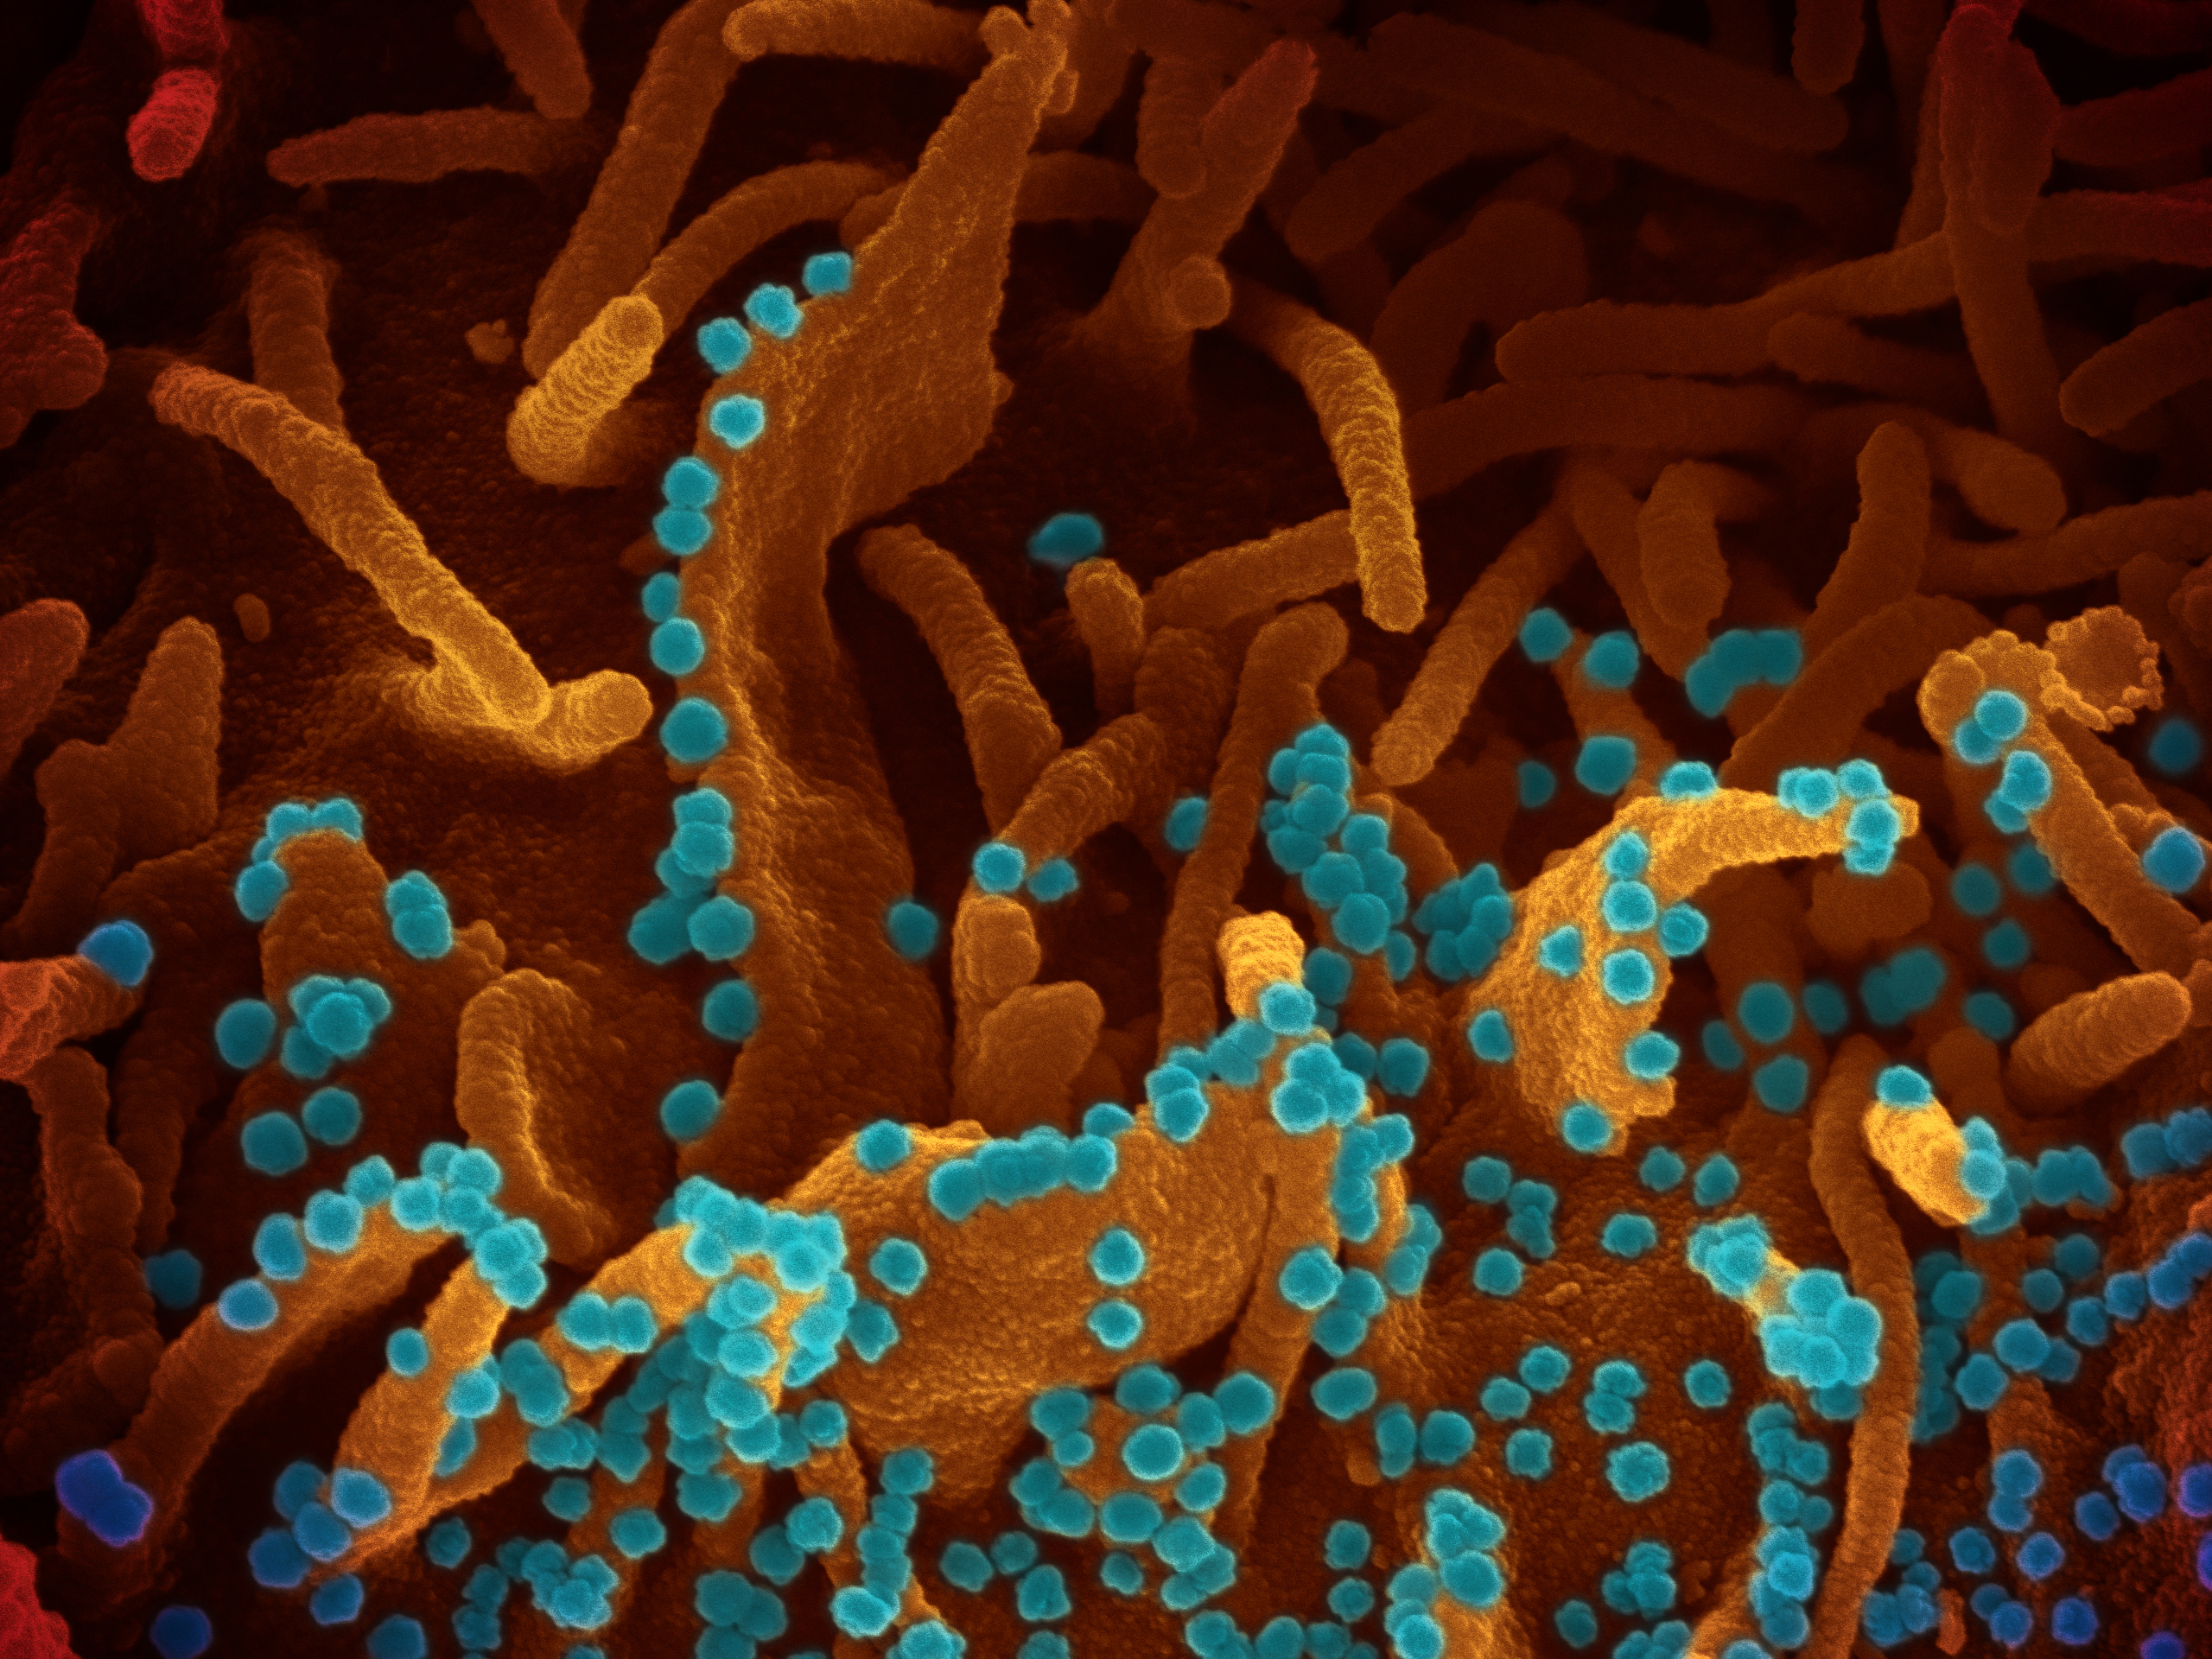 An electron microscope photograph showing viral particles (the small, blue spheres) being released from the surface of a dying kidney cell infected with the coronavirus.